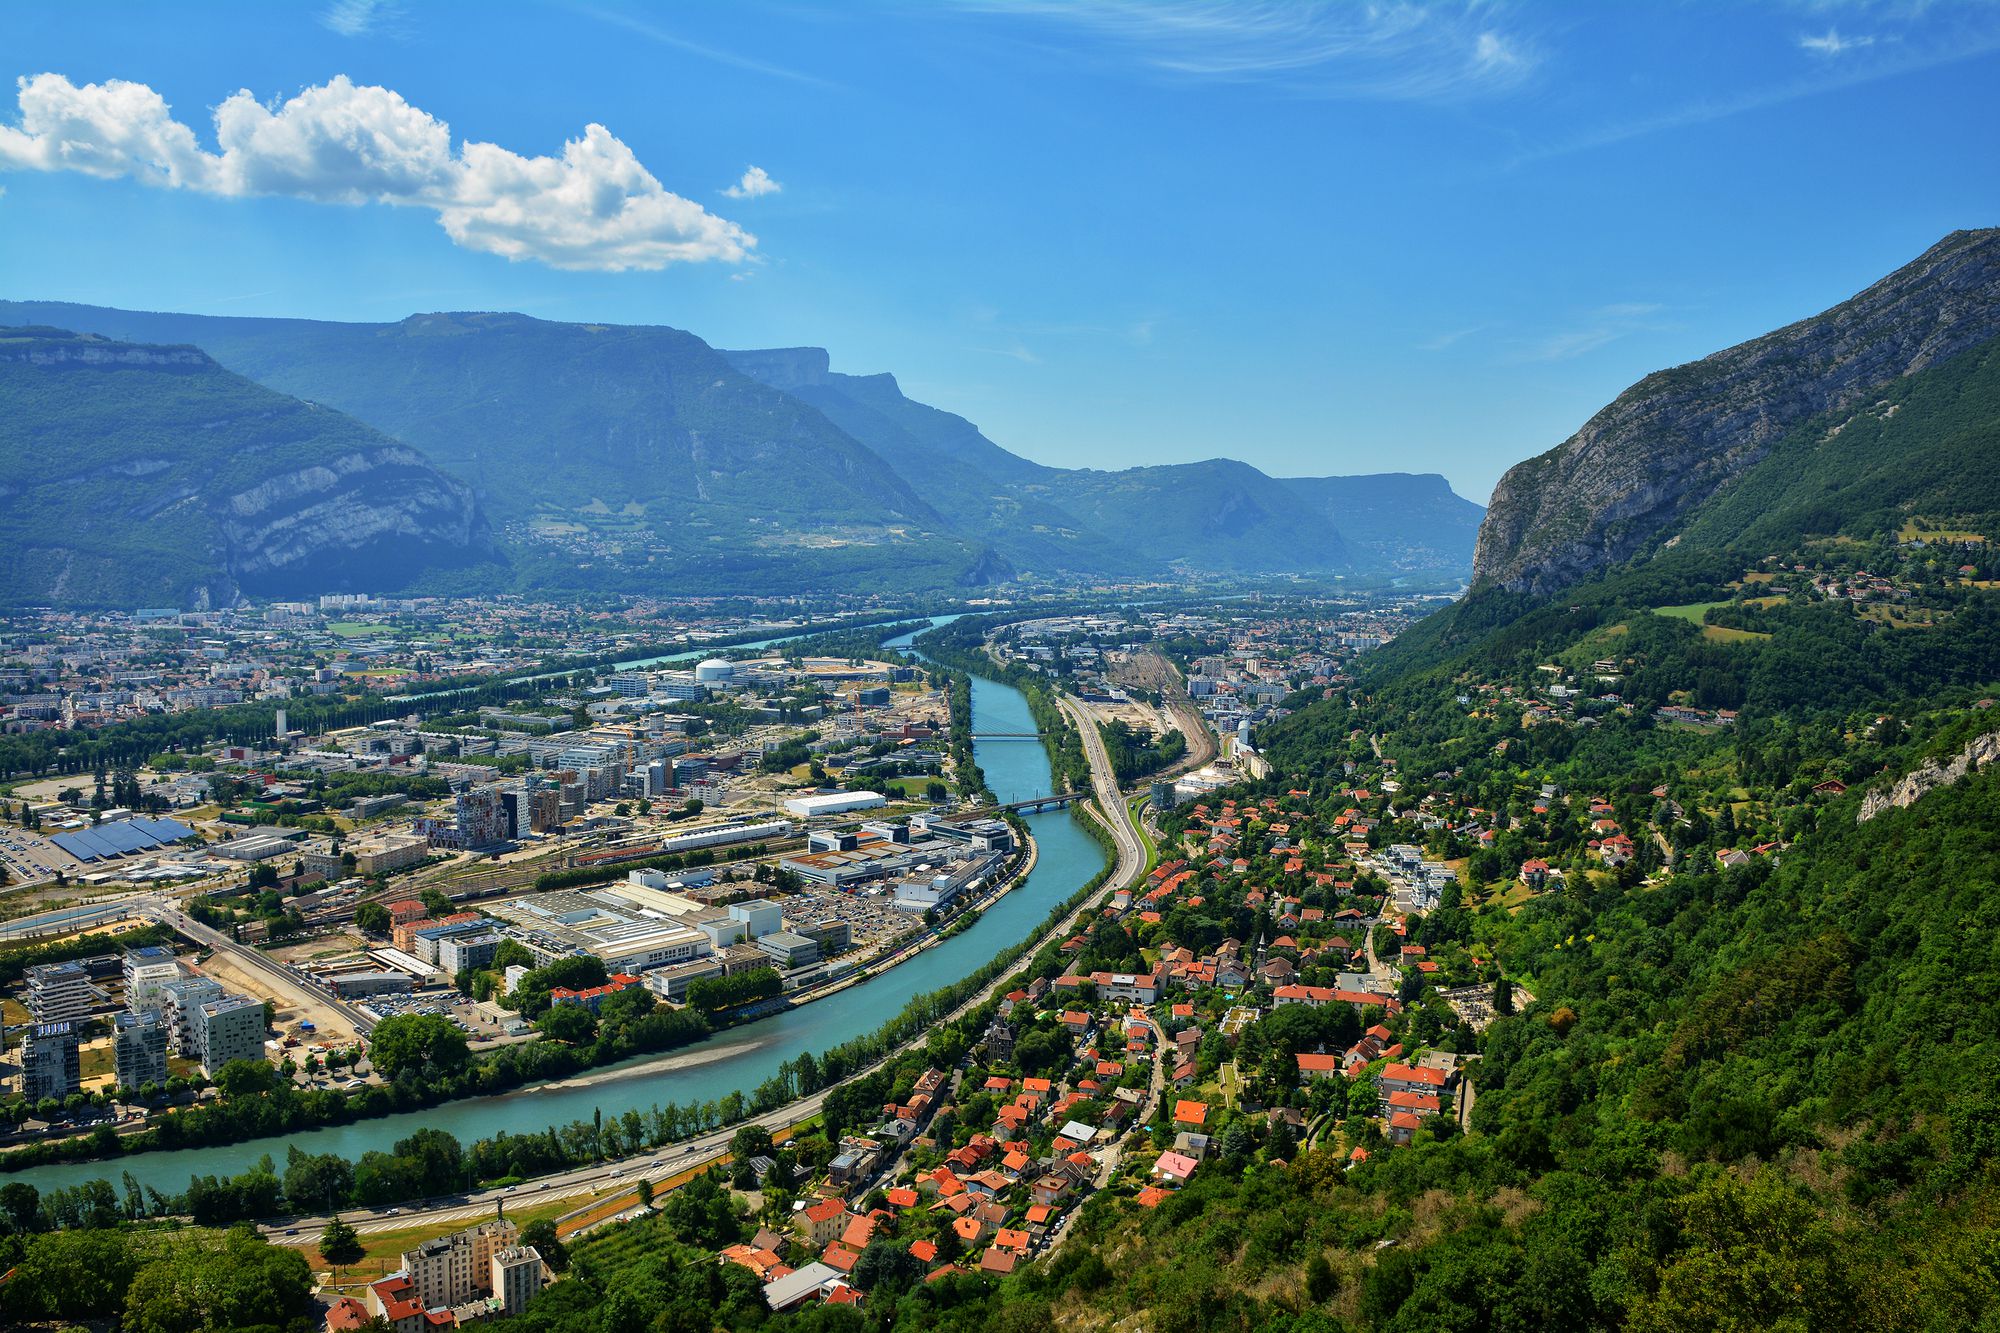 <p>Located in southeastern France, in the Auvergne-Rhone-Alps region, Grenoble is a great choice if you enjoy outdoor life and mountain scenery and are looking for one of the most affordable places to live in France.</p><p>Grenoble is a small city that stands between the Isere and Drac Rivers, at the foot of the Alps. The scenery is absolutely stunning and there is a great choice of outdoor sports including two ski resorts situated just over an hour away. Grenoble has museums and universities, boasting a large student population.</p><p>Grenoble also has an industrial base with a nuclear research facility and semiconductor companies and these are popular with <a href="https://mydolcecasa.com/top-9-best-jobs-in-france-for-english-speakers/">expatriate workers</a>.</p><p>Rental properties are reasonably priced. For example, a 1,000-square-foot apartment costs about $1,200-1,300 per month.</p>